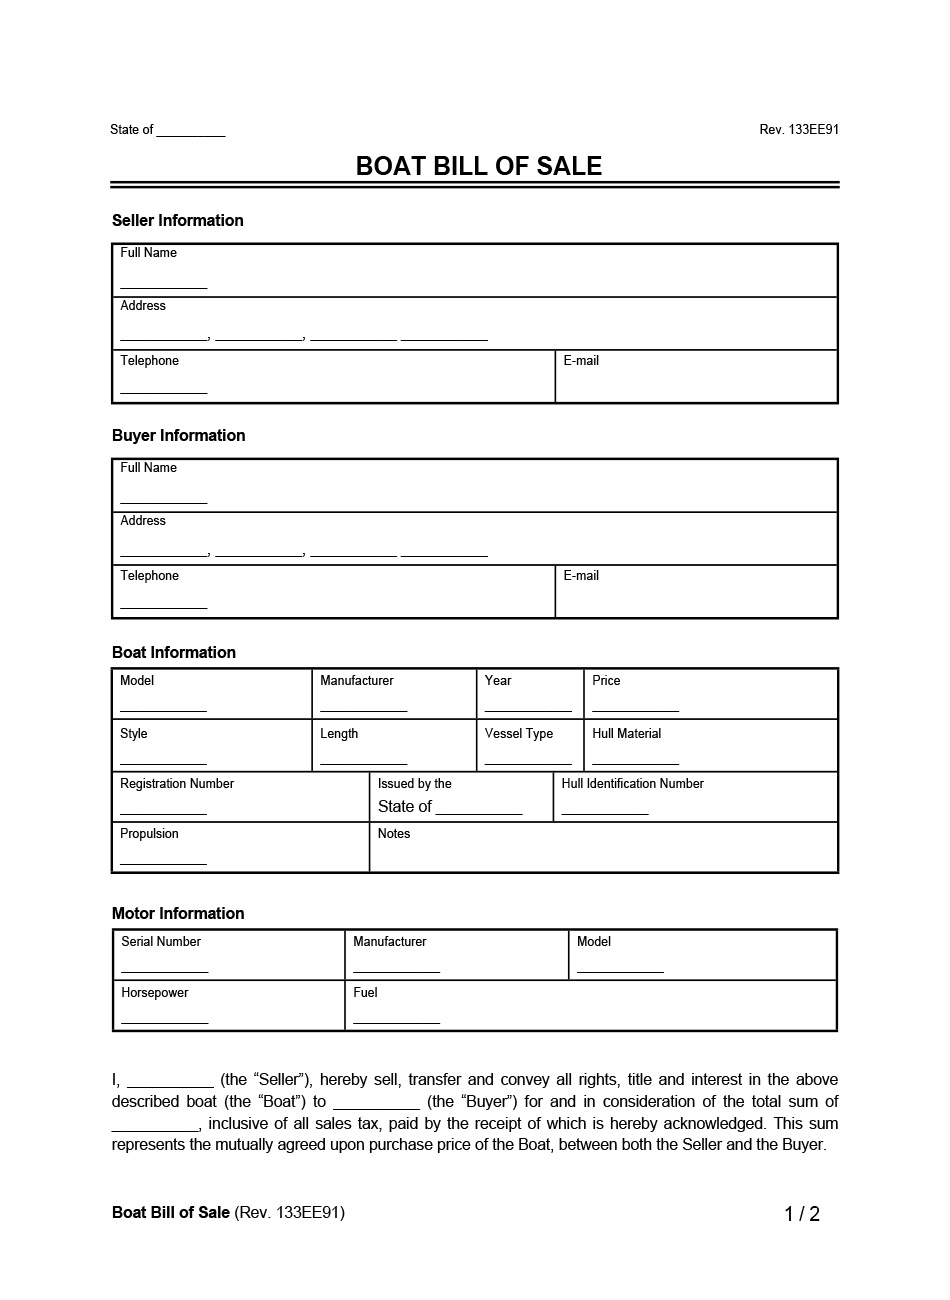 Boat Bill of Sale Form Example